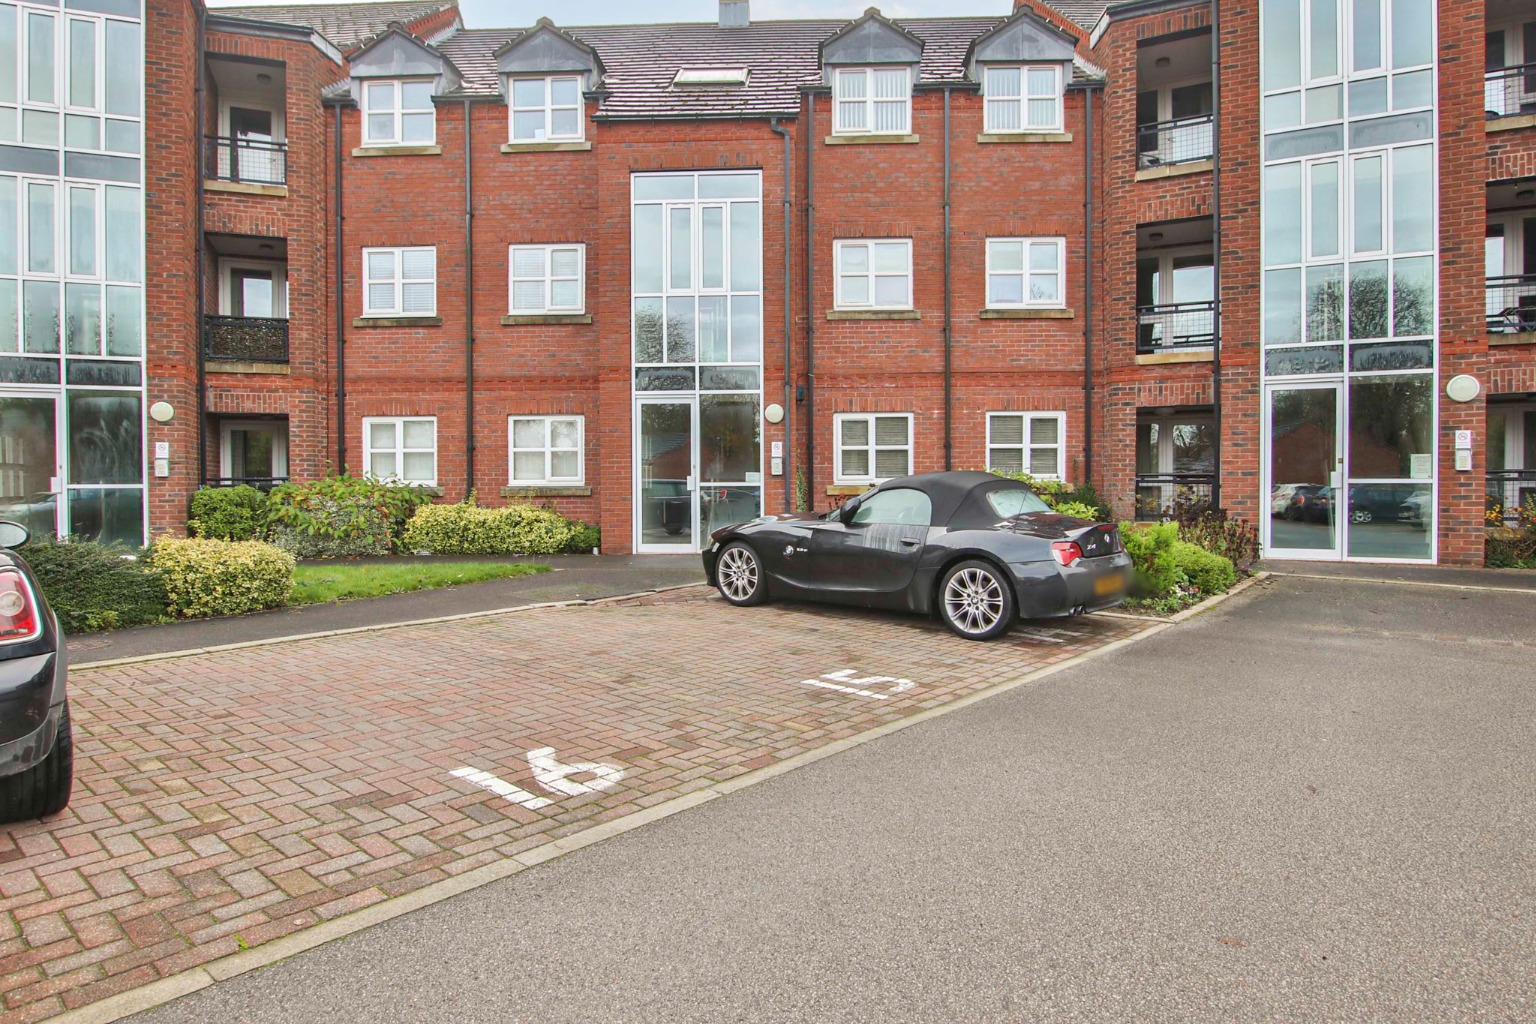 2 bed flat for sale in Chancery Court, Brough, HU15